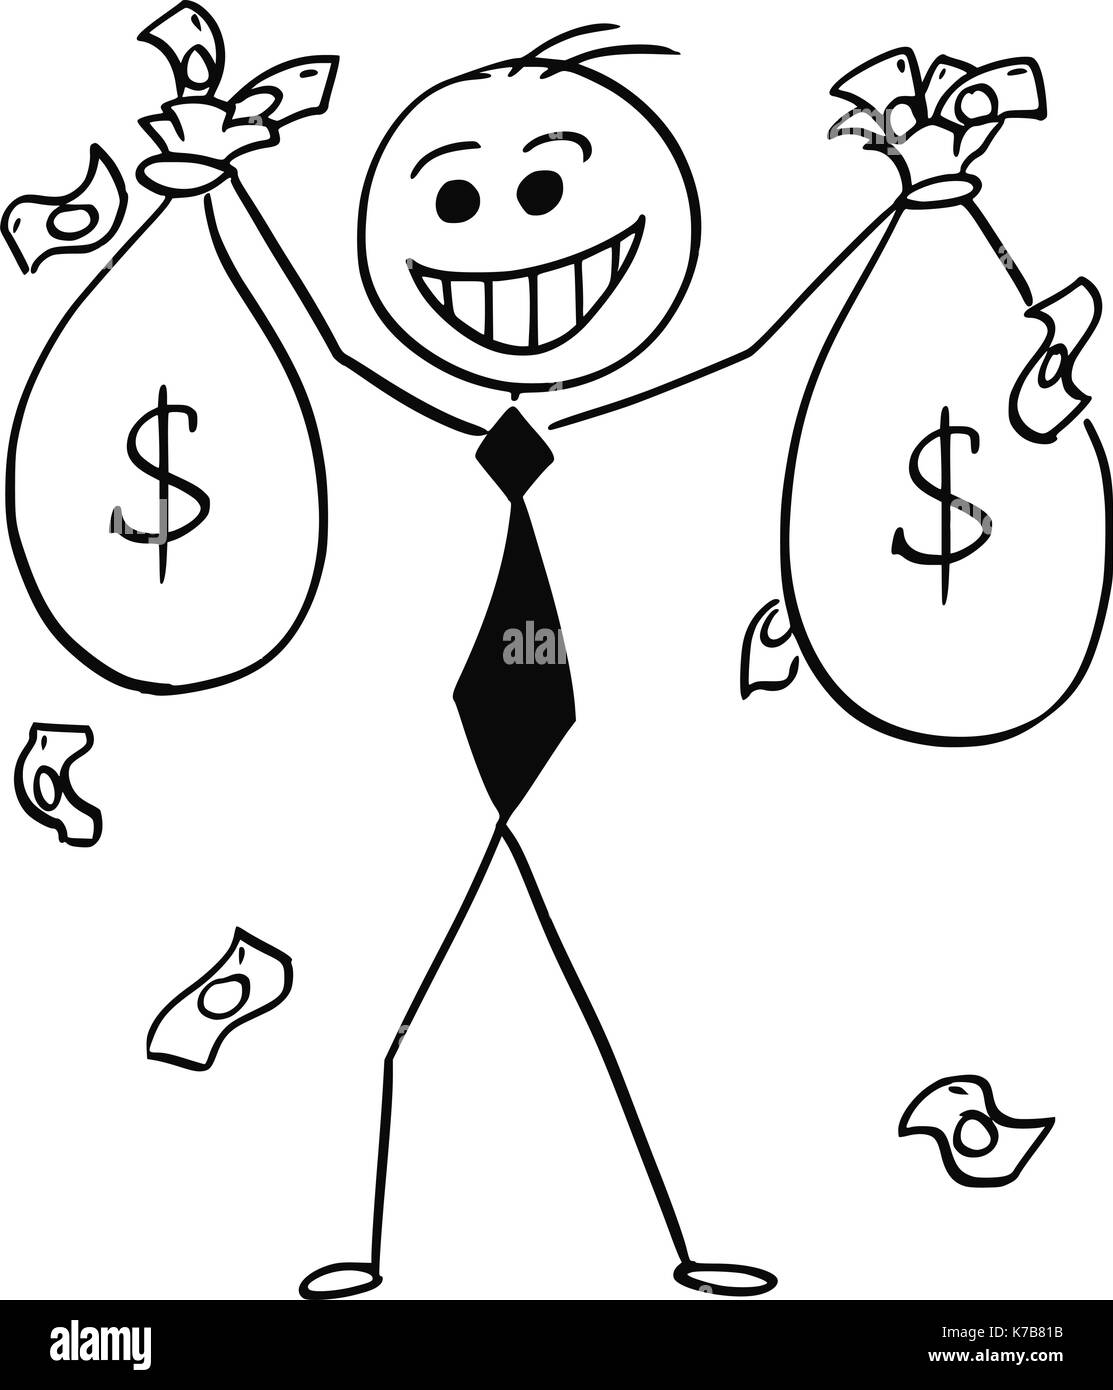 Cartoon stick man illustration of smiling business man businessman with money bags in raised hands. Stock Vector